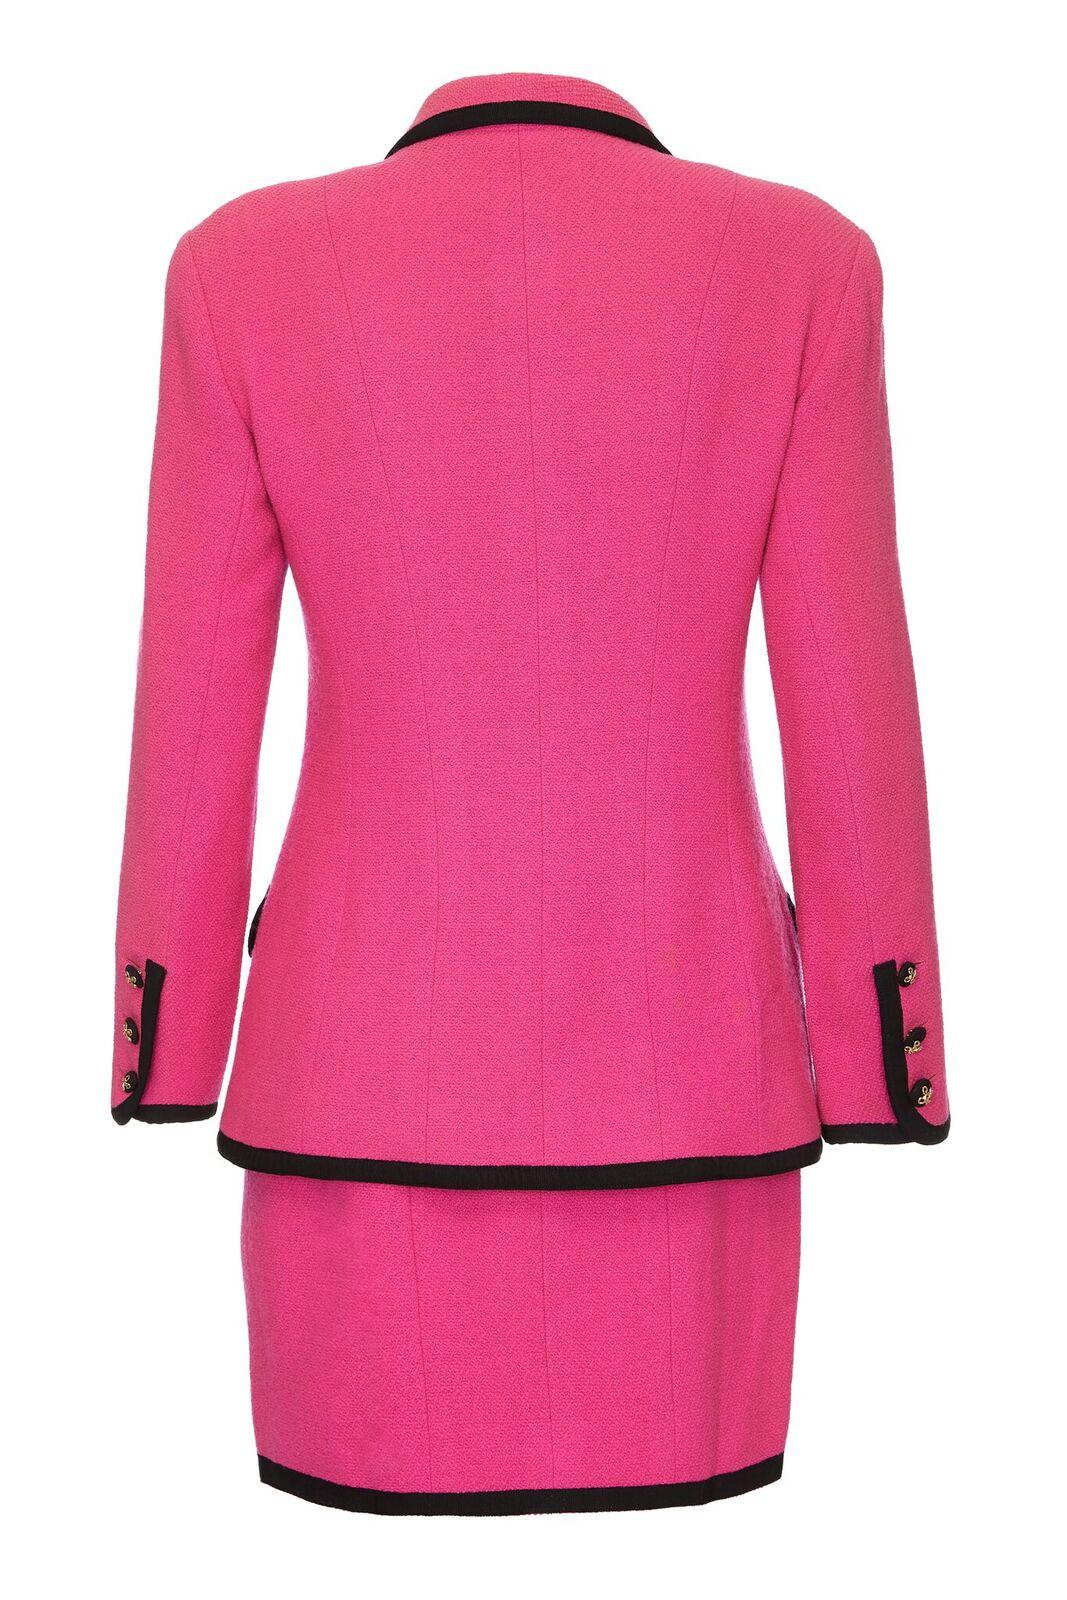 This arresting soft wool late 1980s to early 1990s Chanel skirt suit in fuschia pink is in superb condition and is fully lined in soft pink silk with immaculate tailoring. The curved notched lapel falls into a central button stand with 4 x black